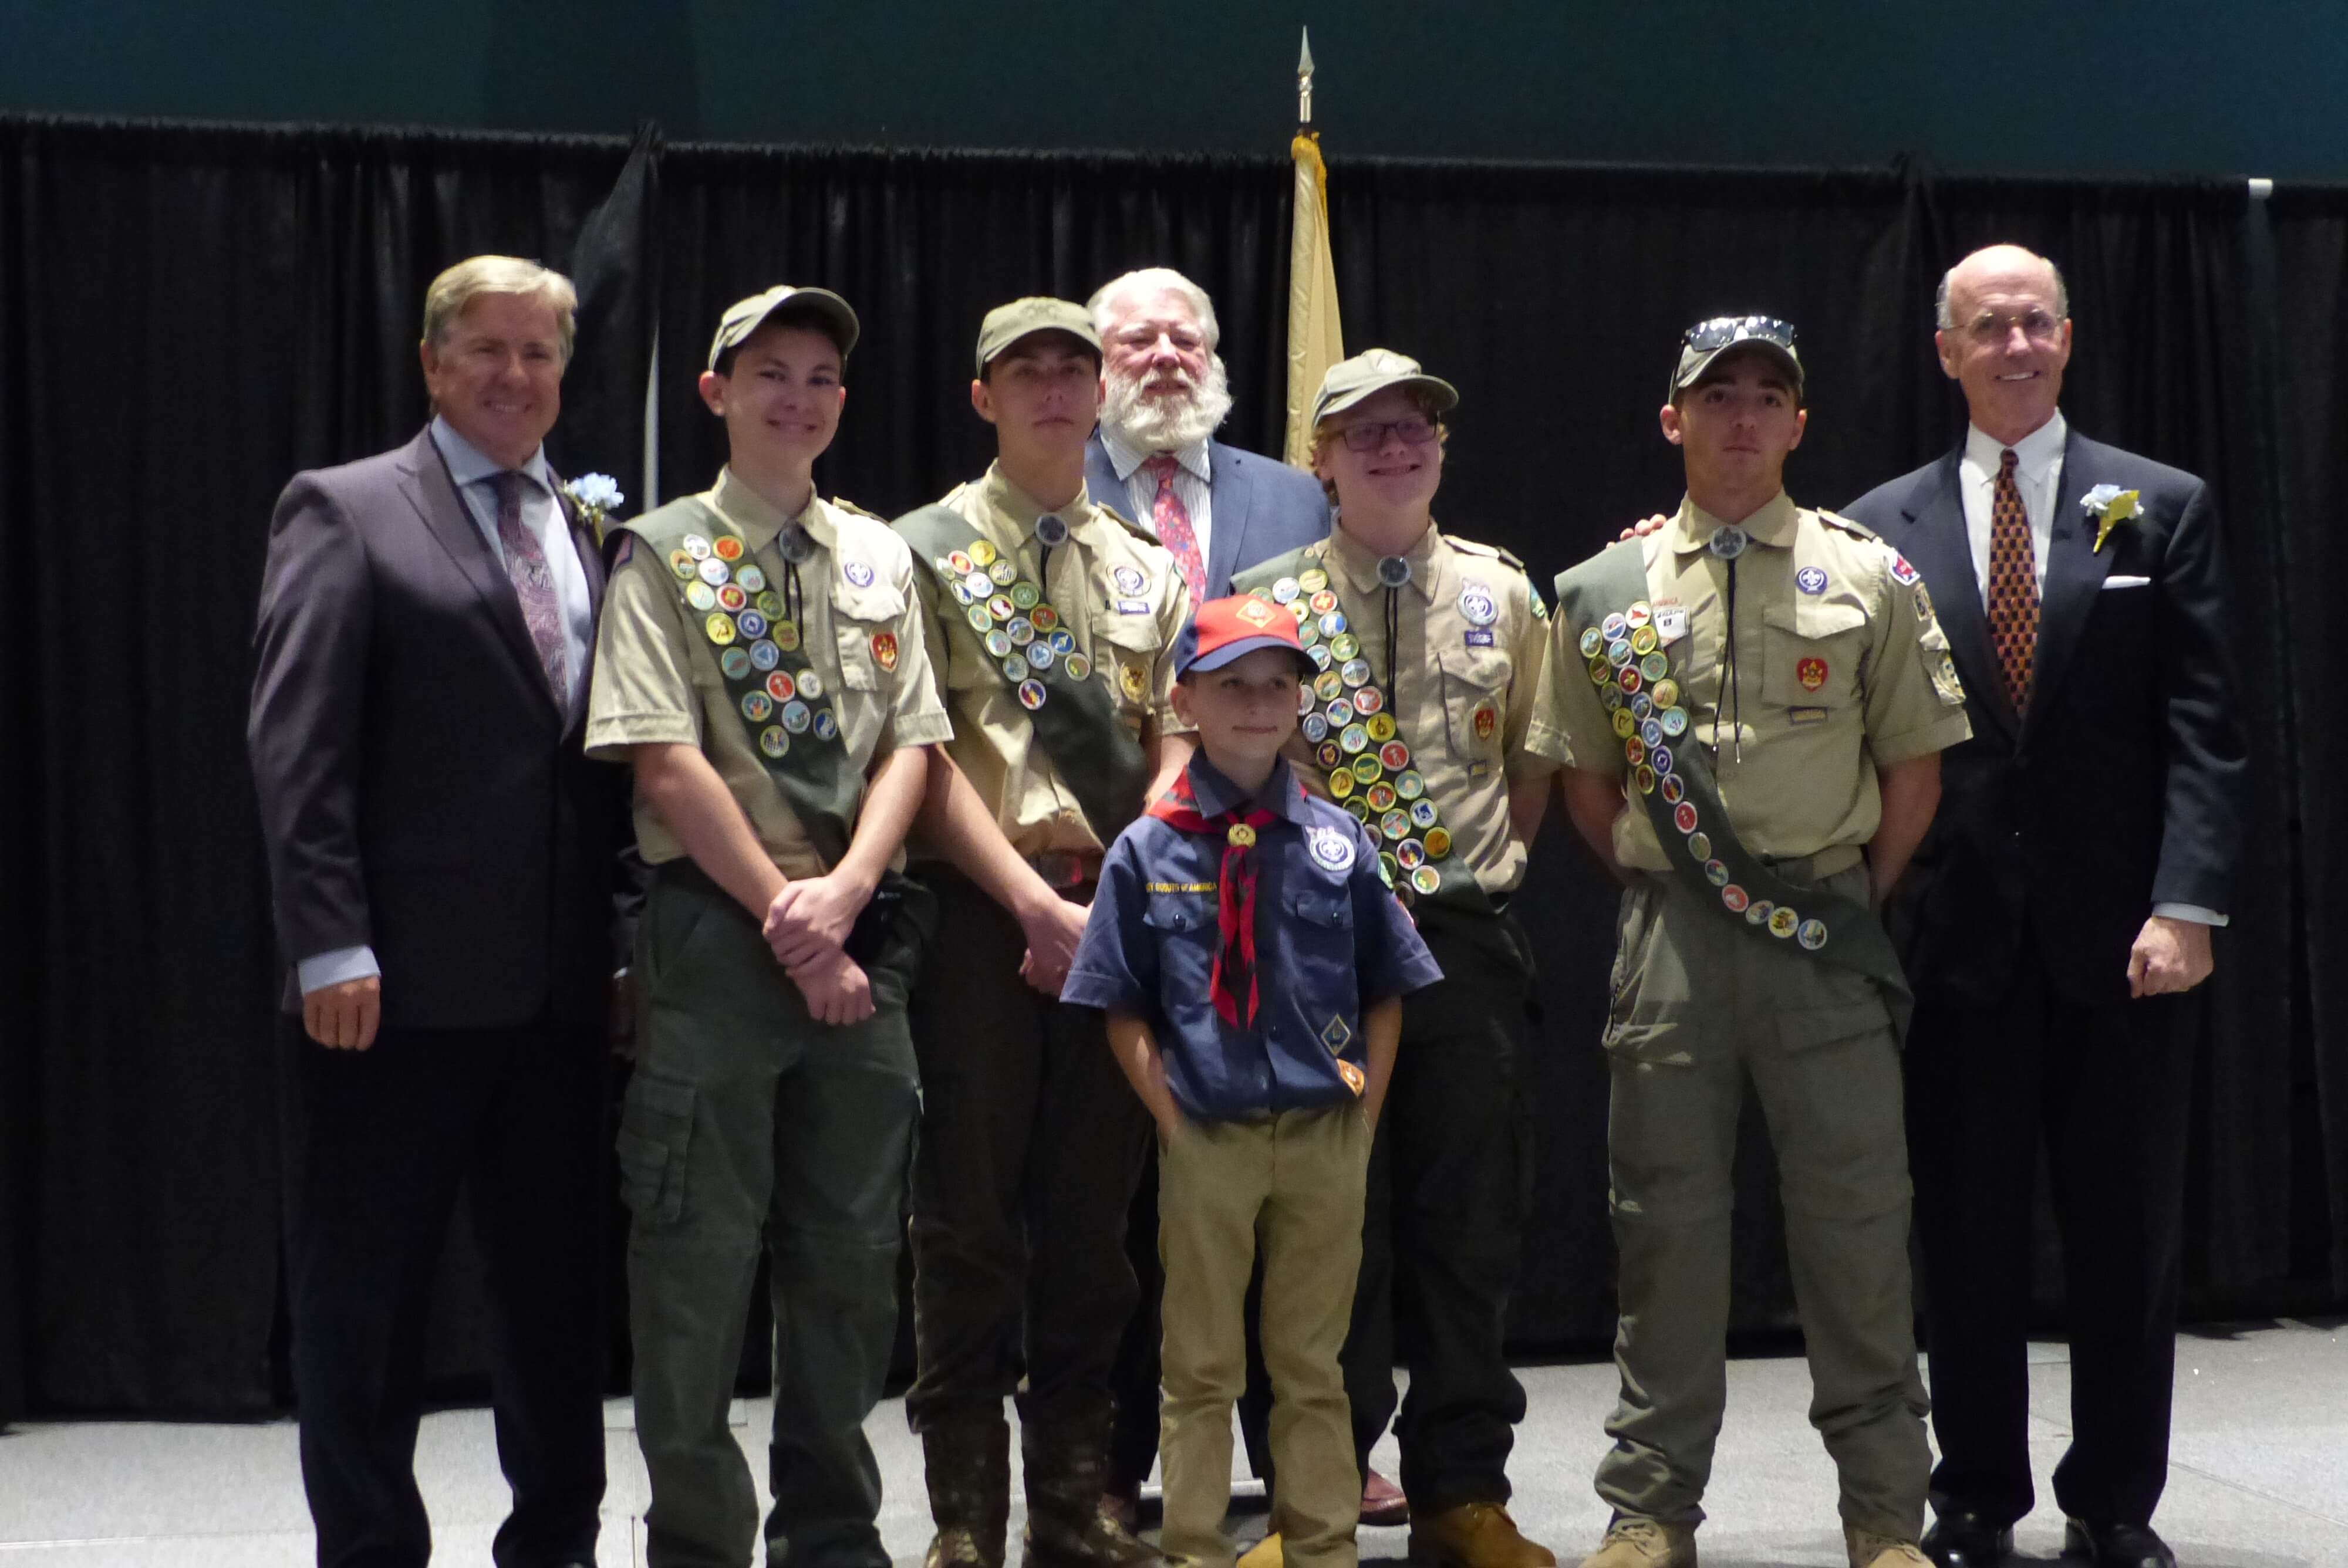 Patrick Healey (far-left) and Eustace Mita (far-right) pose for a photo with scouts of Cape May County after being recognized as Distinguished Citizens of the Year.